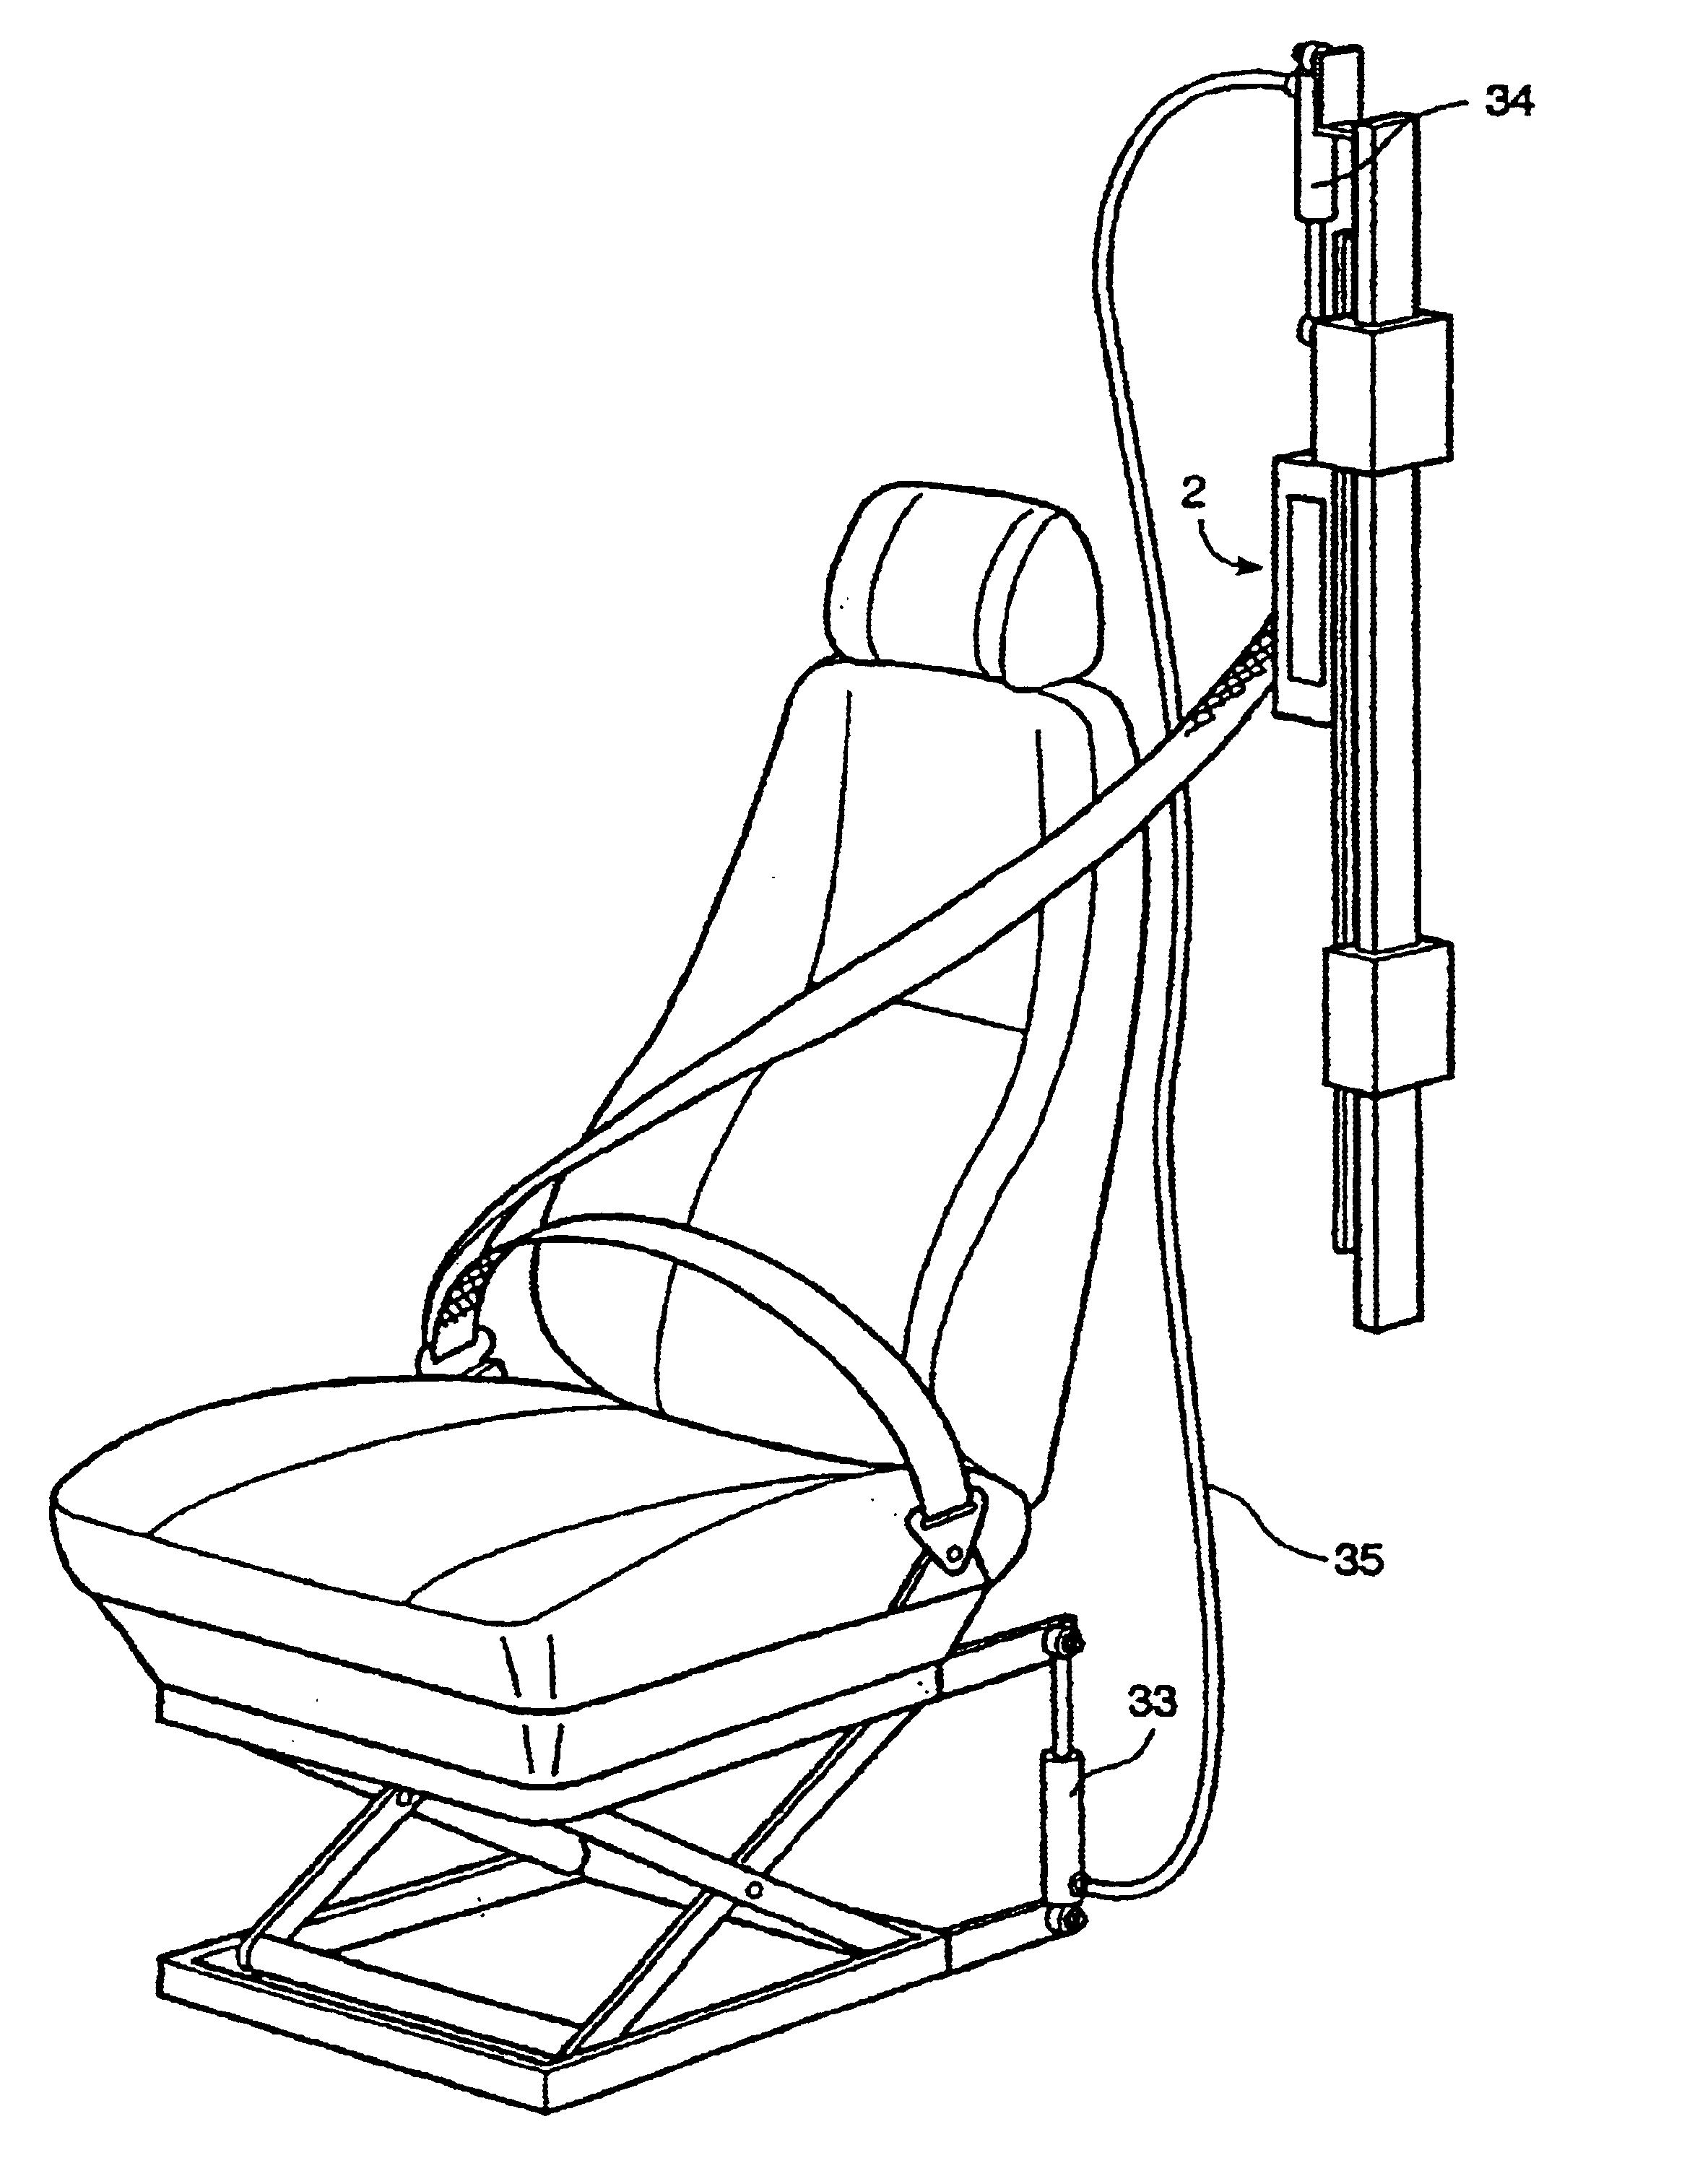 Arrangement and method for height adjustment of the upper attachment point of a safety belt